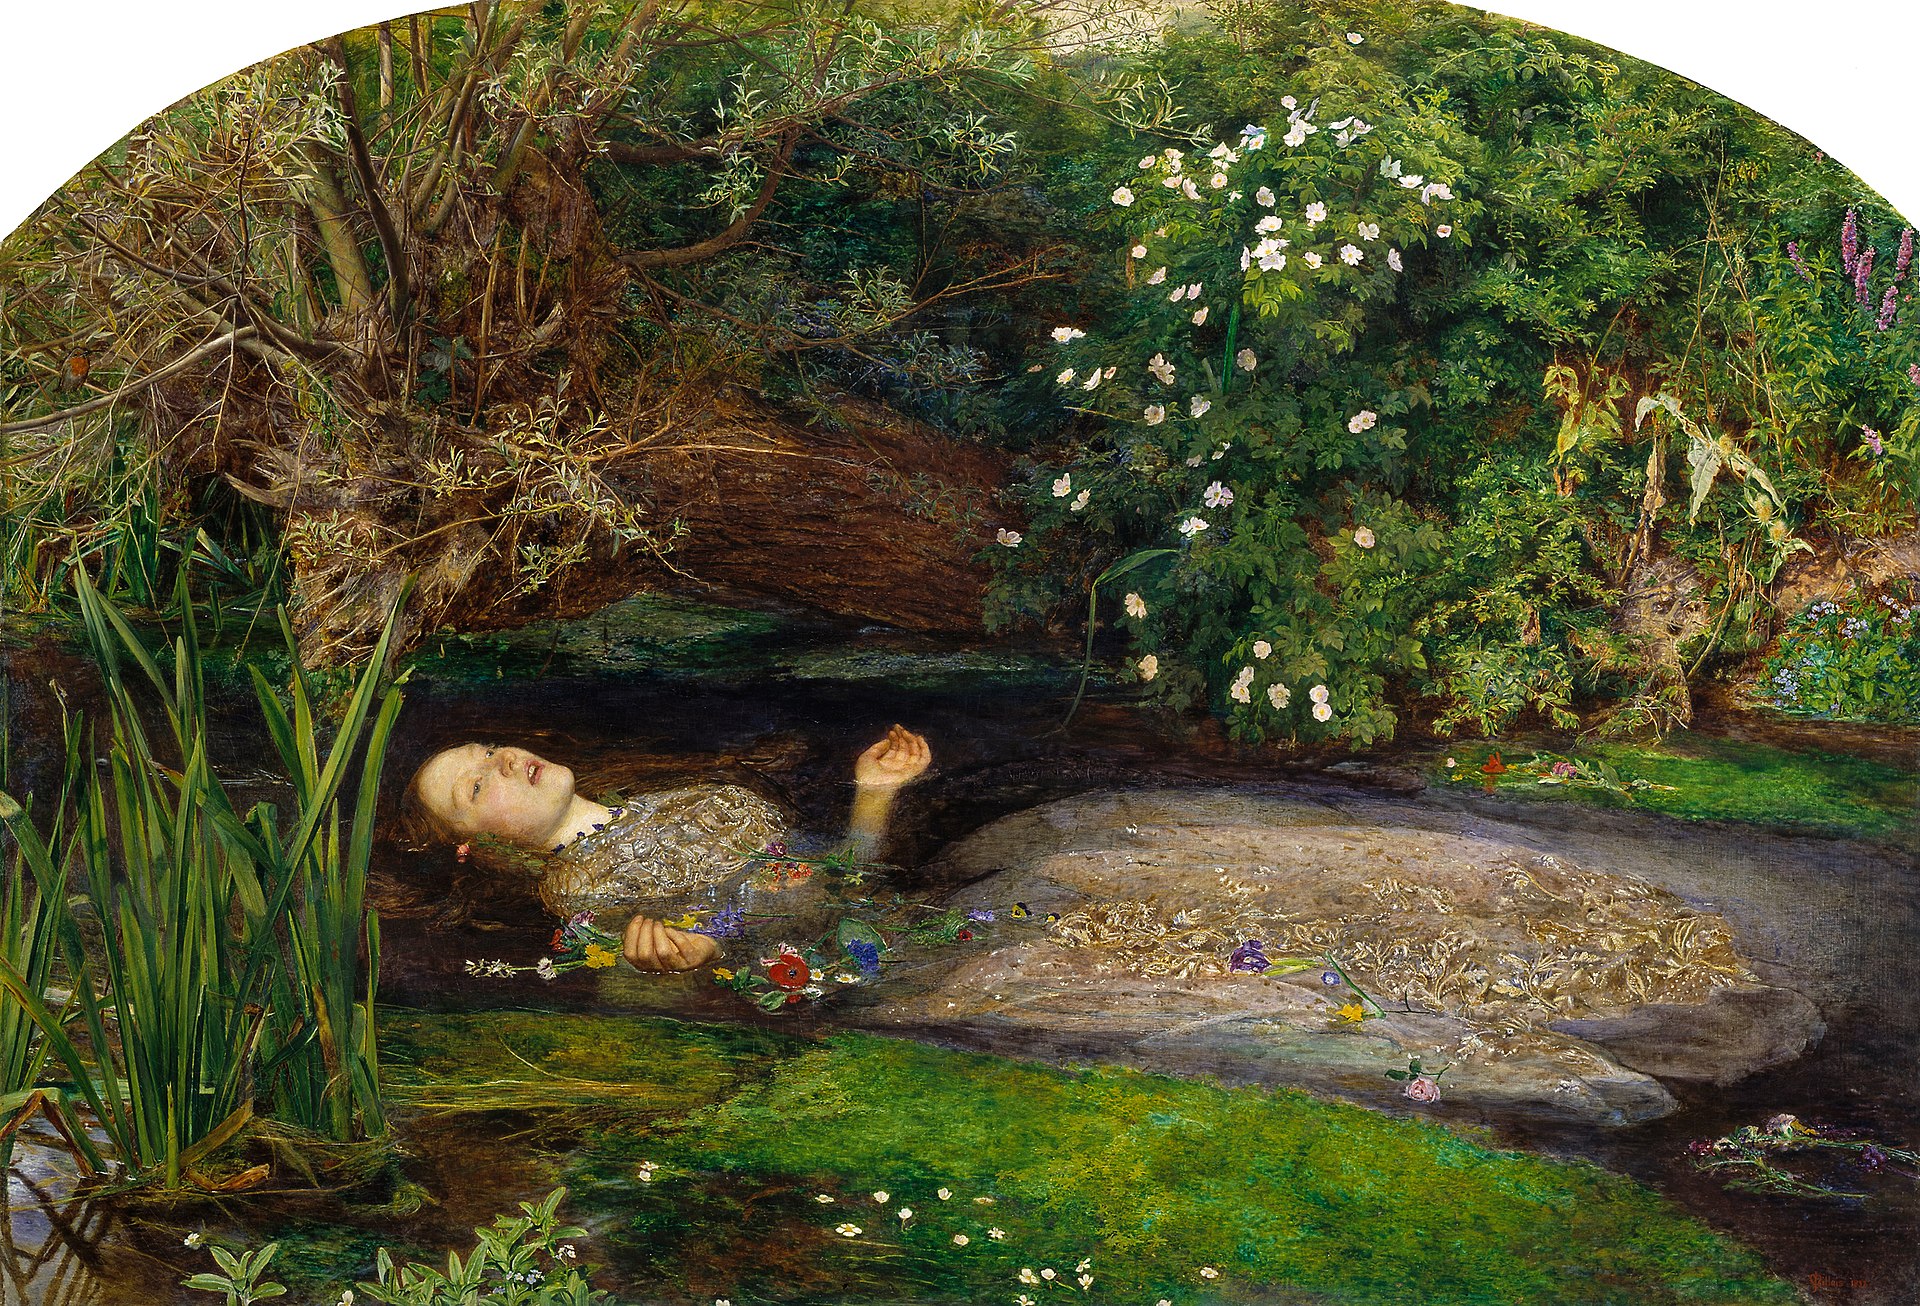 Manchester Ophelia: The frozen woman found in the River Irwell over 200 years ago, The Manc